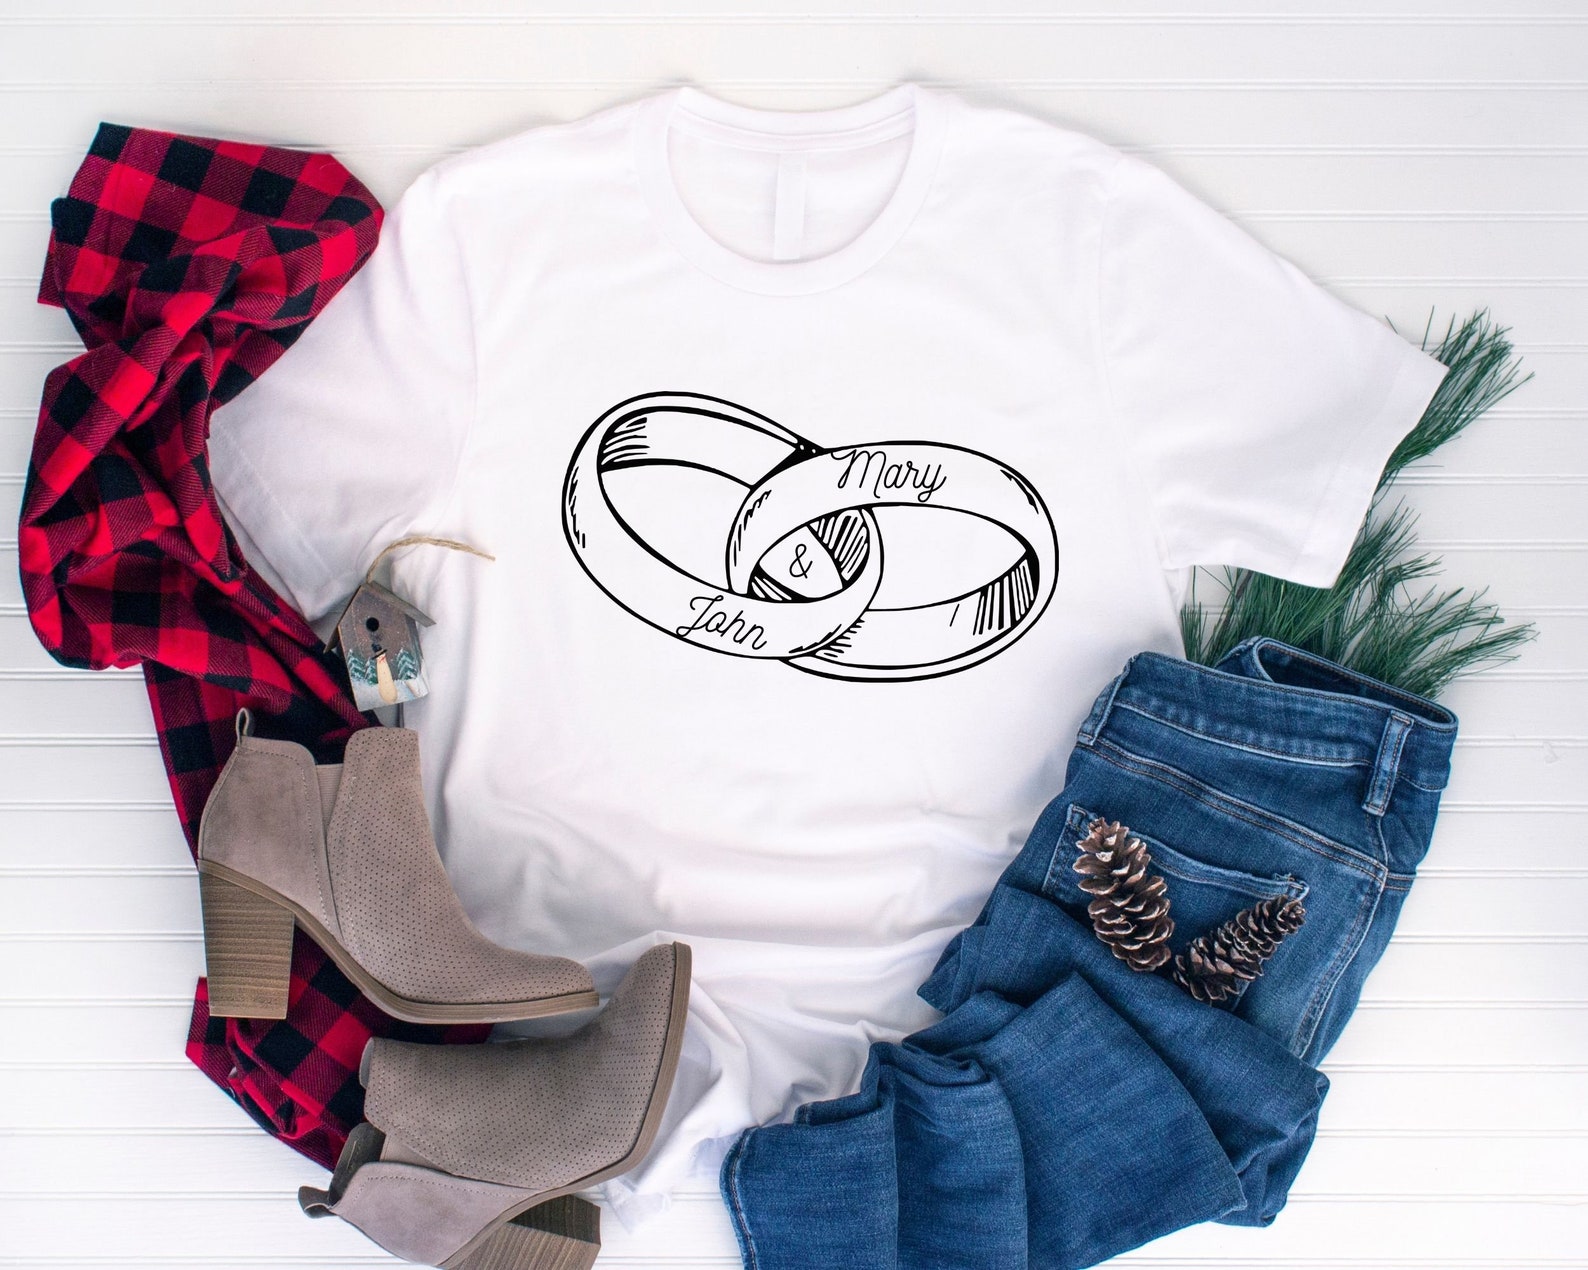 White t-shirt with rings.